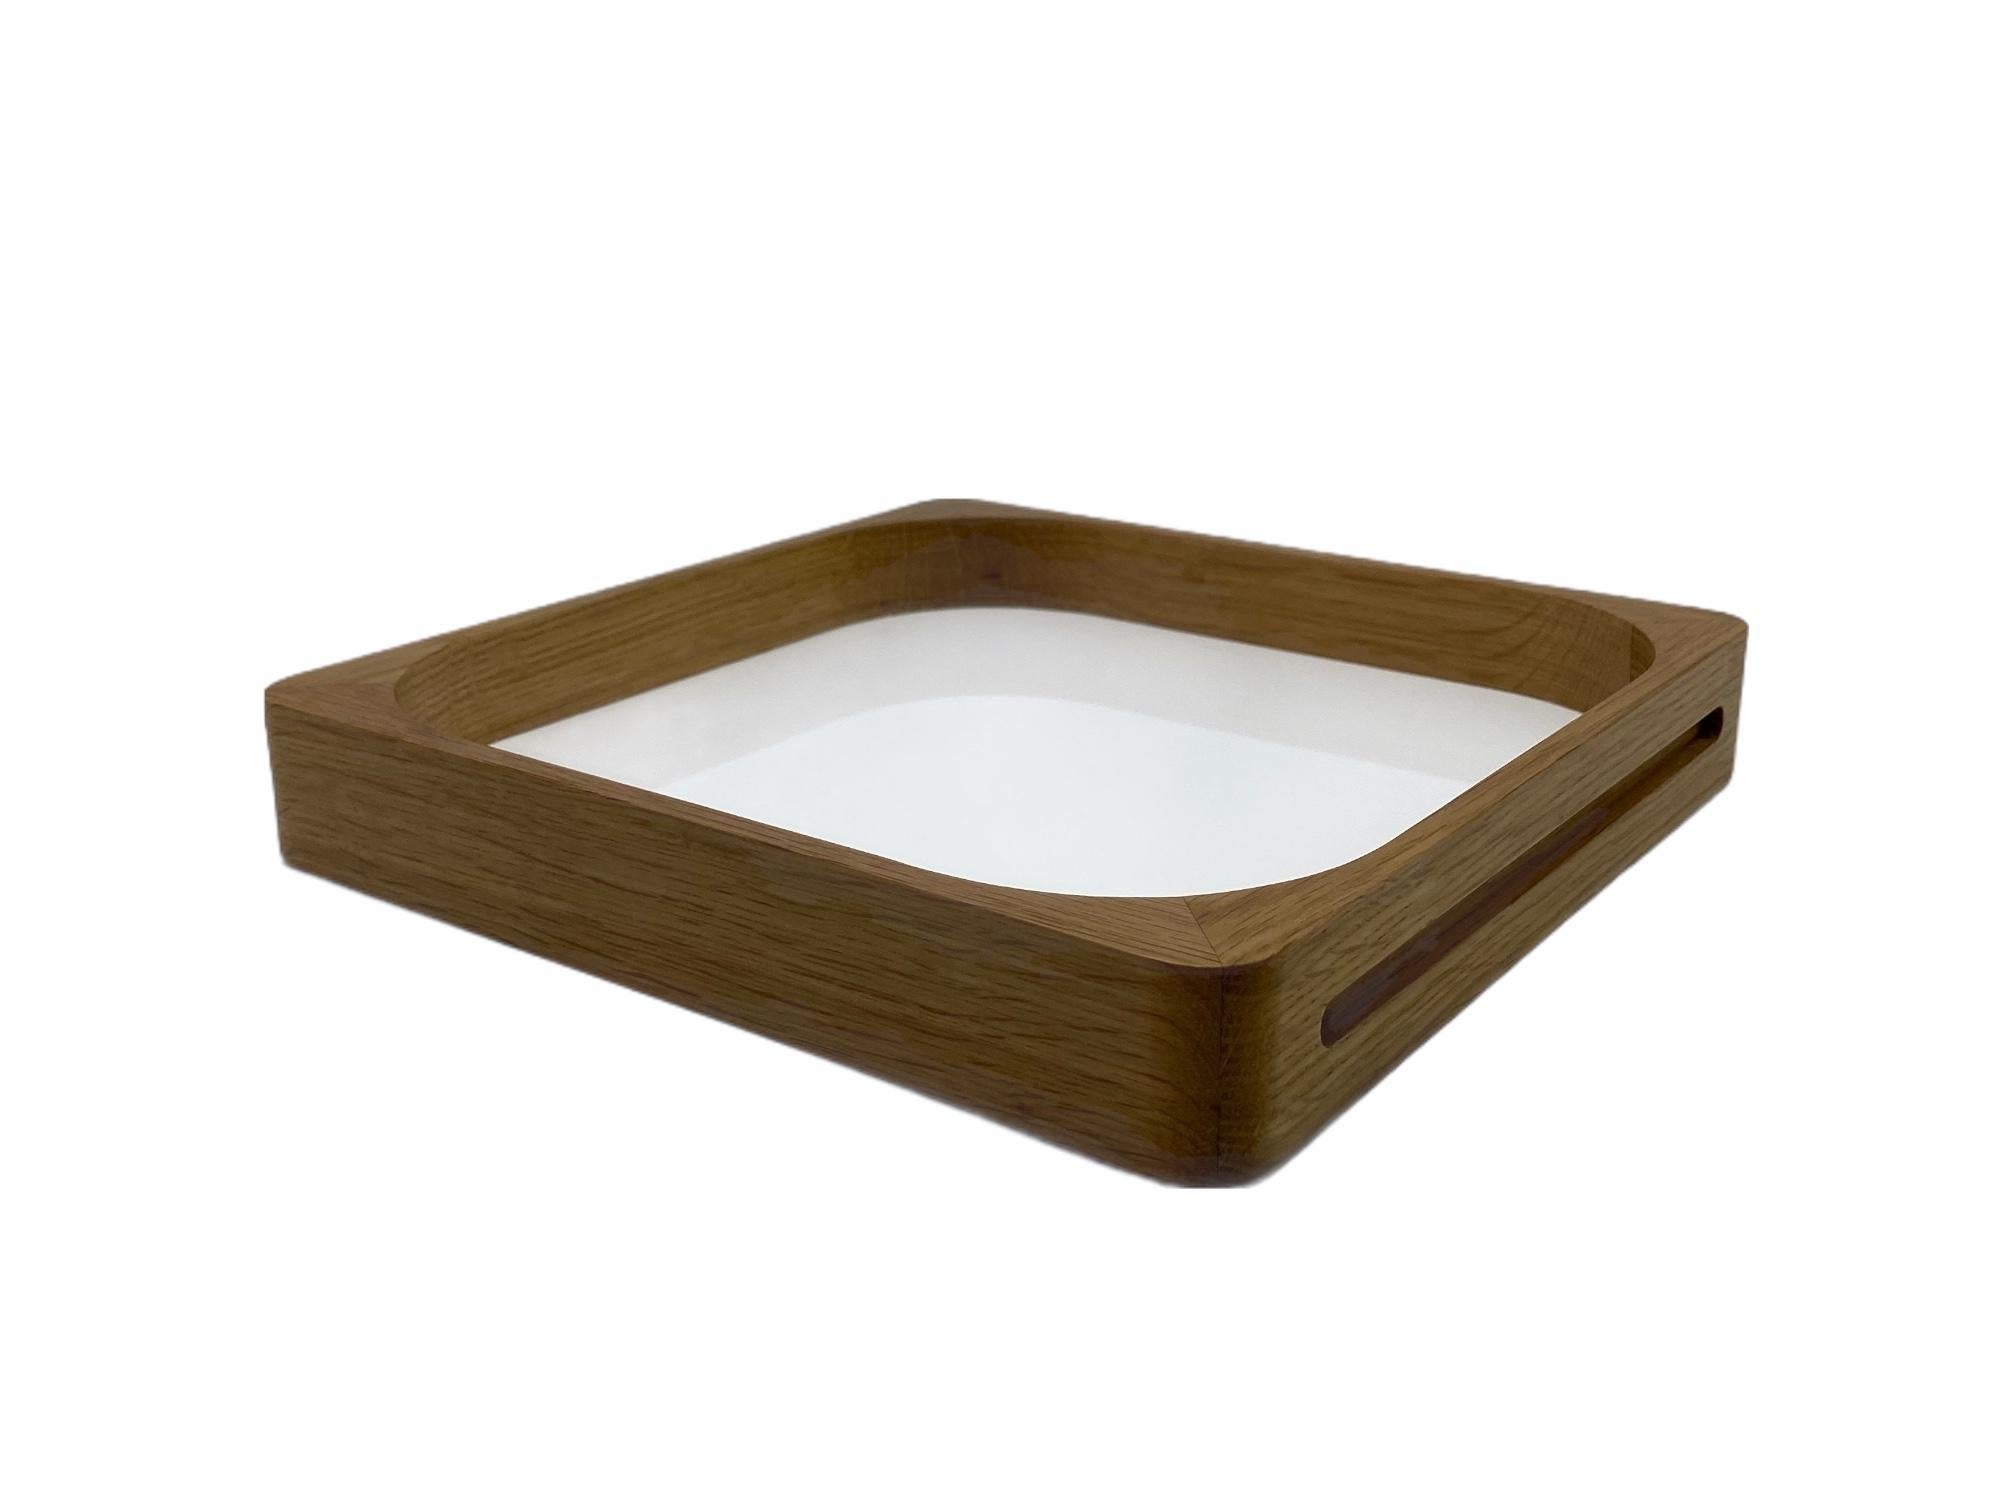 This classic, yet modern, craftsmanship based tray is made out of Oak wood and acrylic and was designed by GS in 2004. It can be used by clients as a cocktail tray as well as a very modern and practical serving tray, making it the perfect gift. The